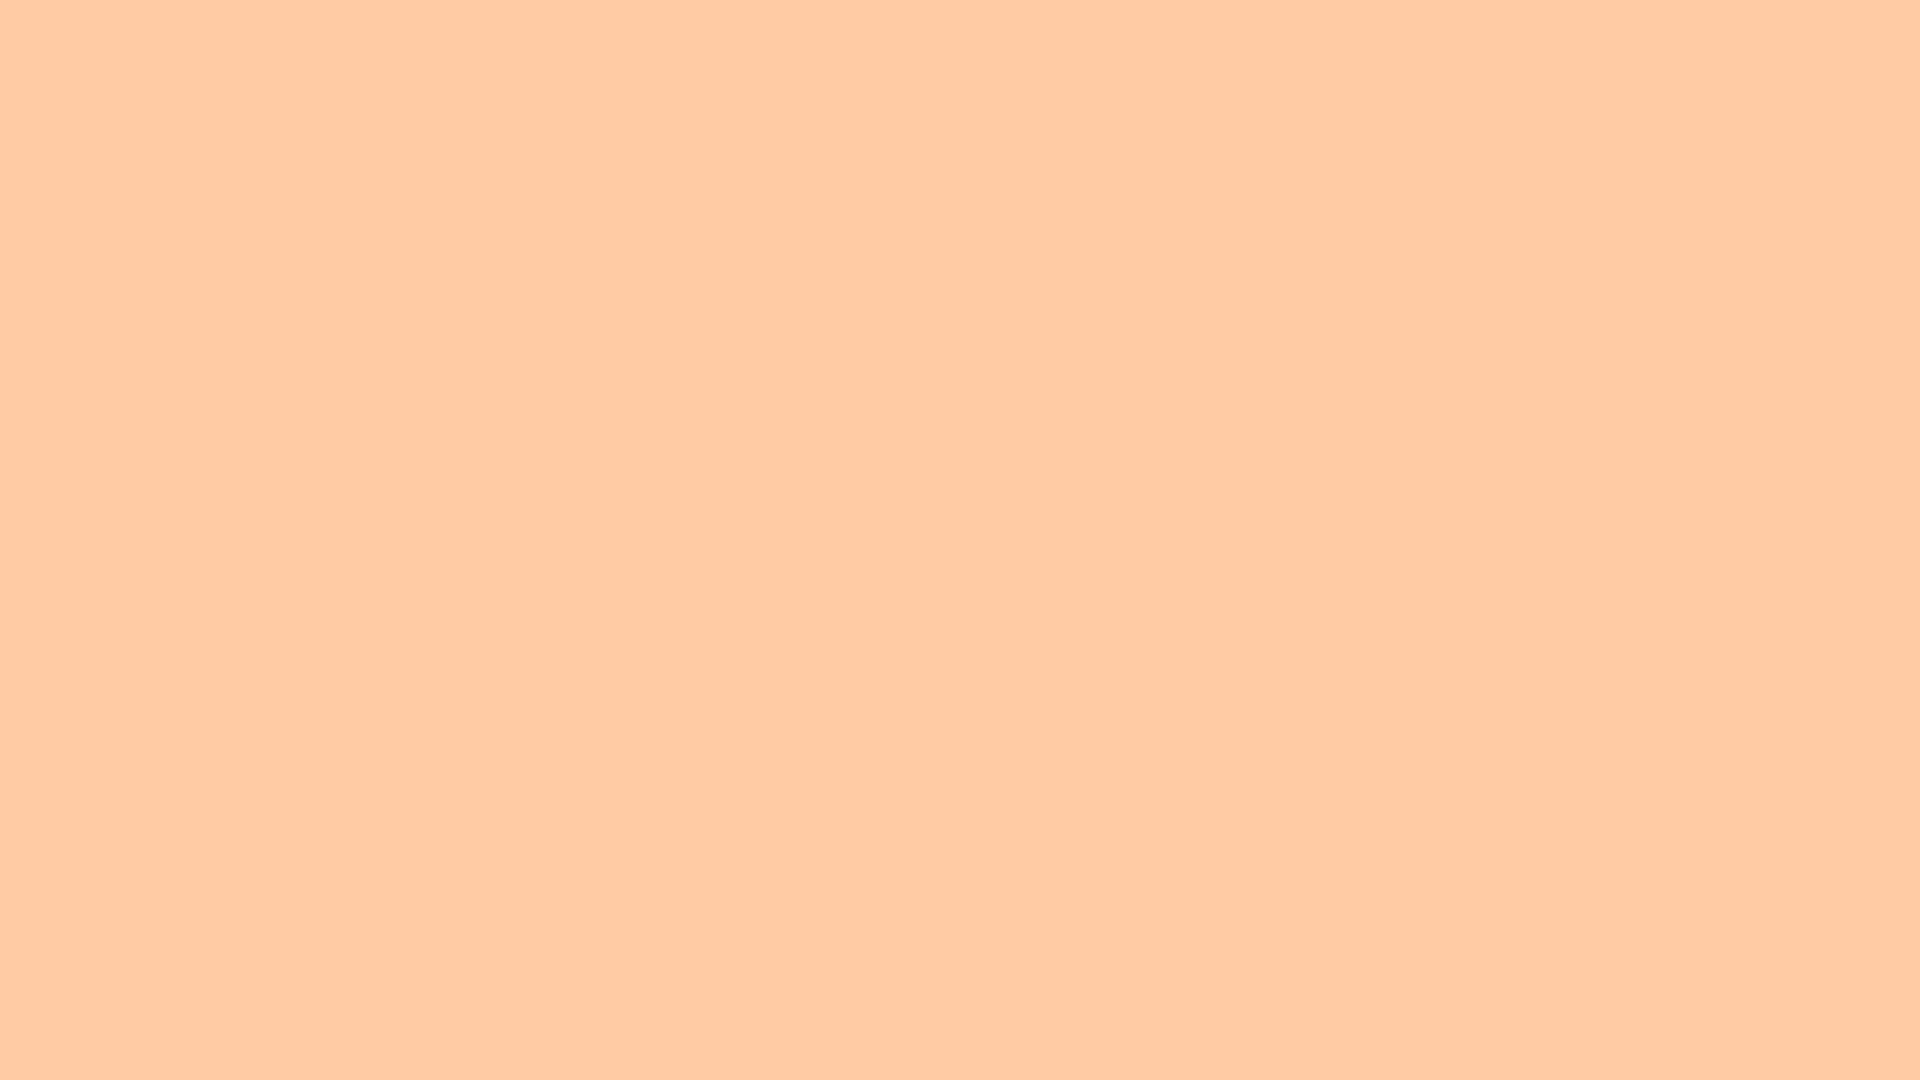 1920x1080 Deep Peach Solid Color Background